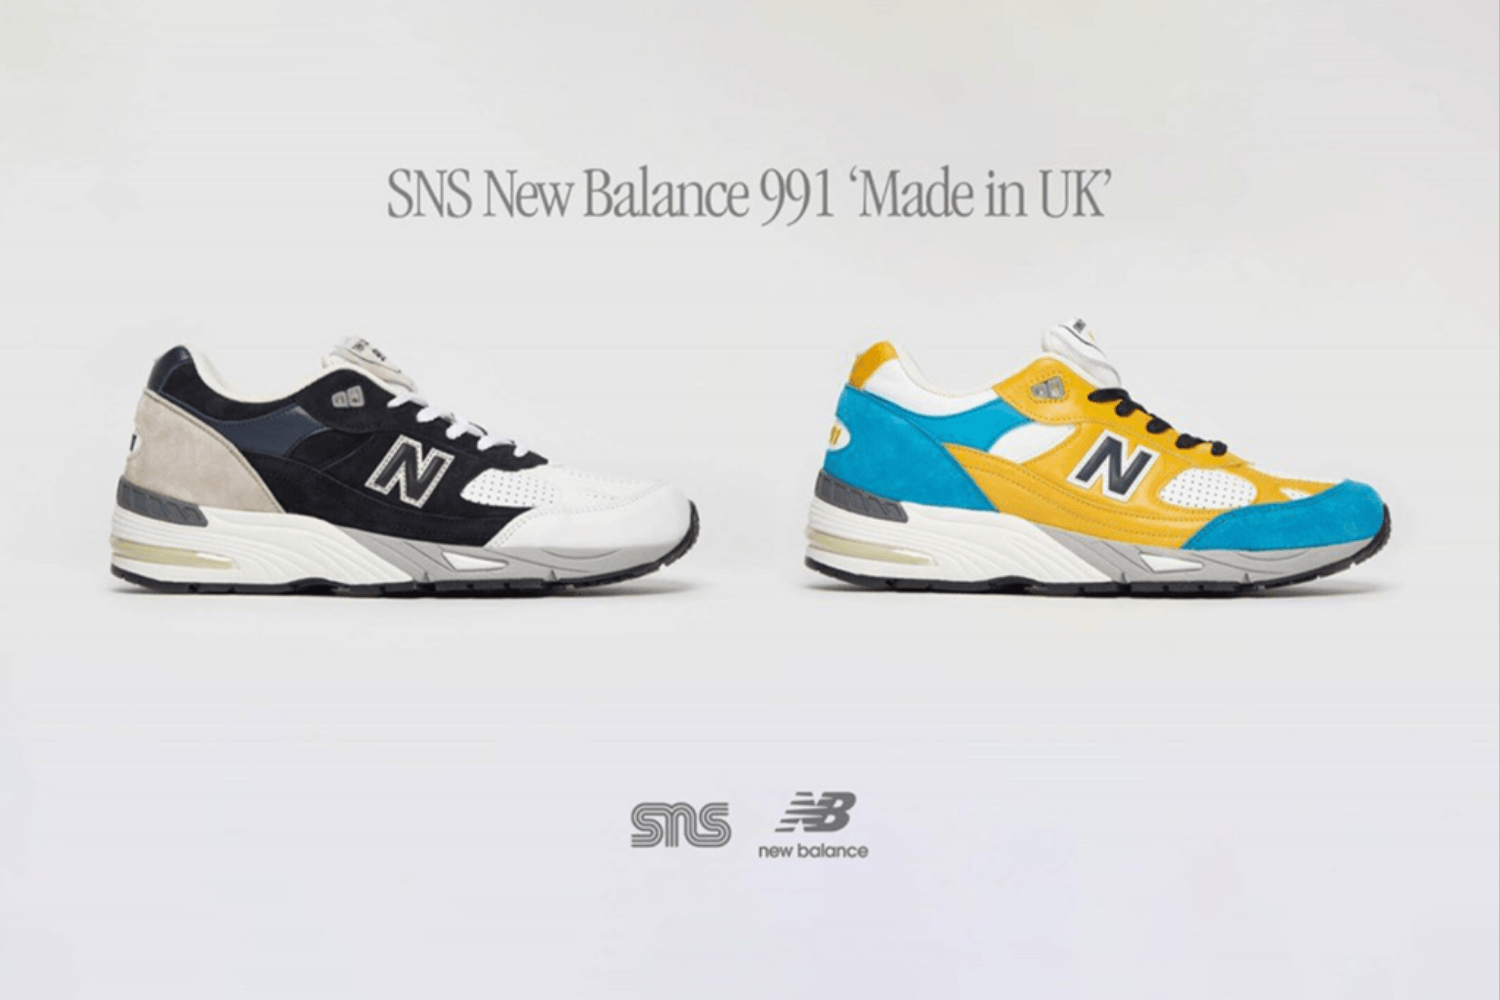 SNS x New Balance 991 'Made in UK' will drop soon